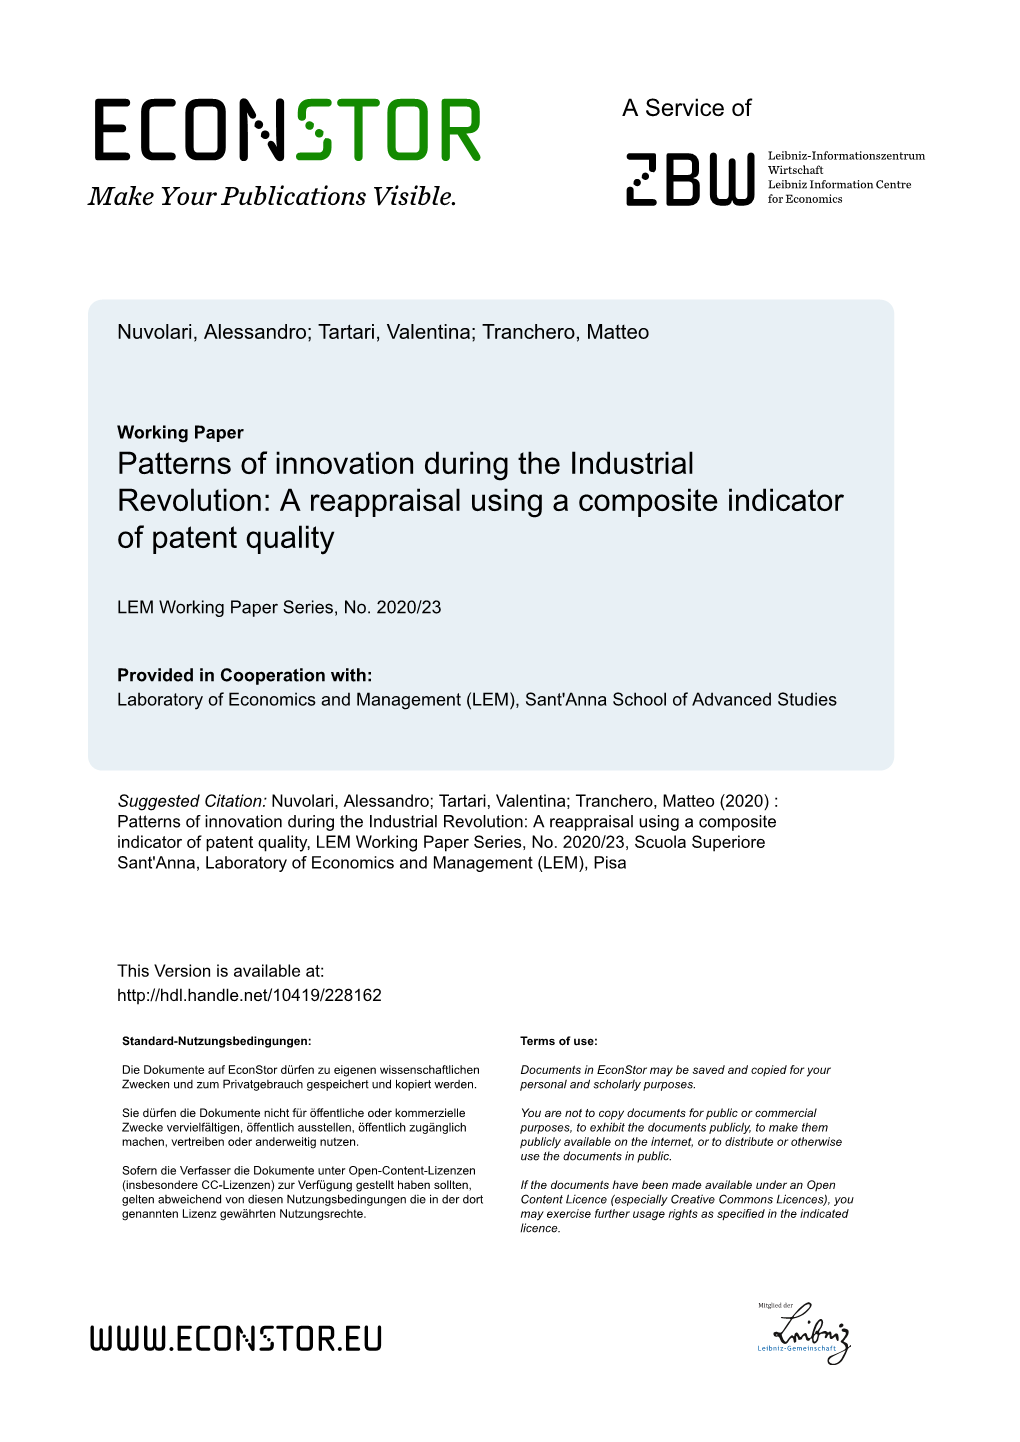 Patterns of Innovation During the Industrial Revolution: a Reappraisal Using a Composite Indicator of Patent Quality